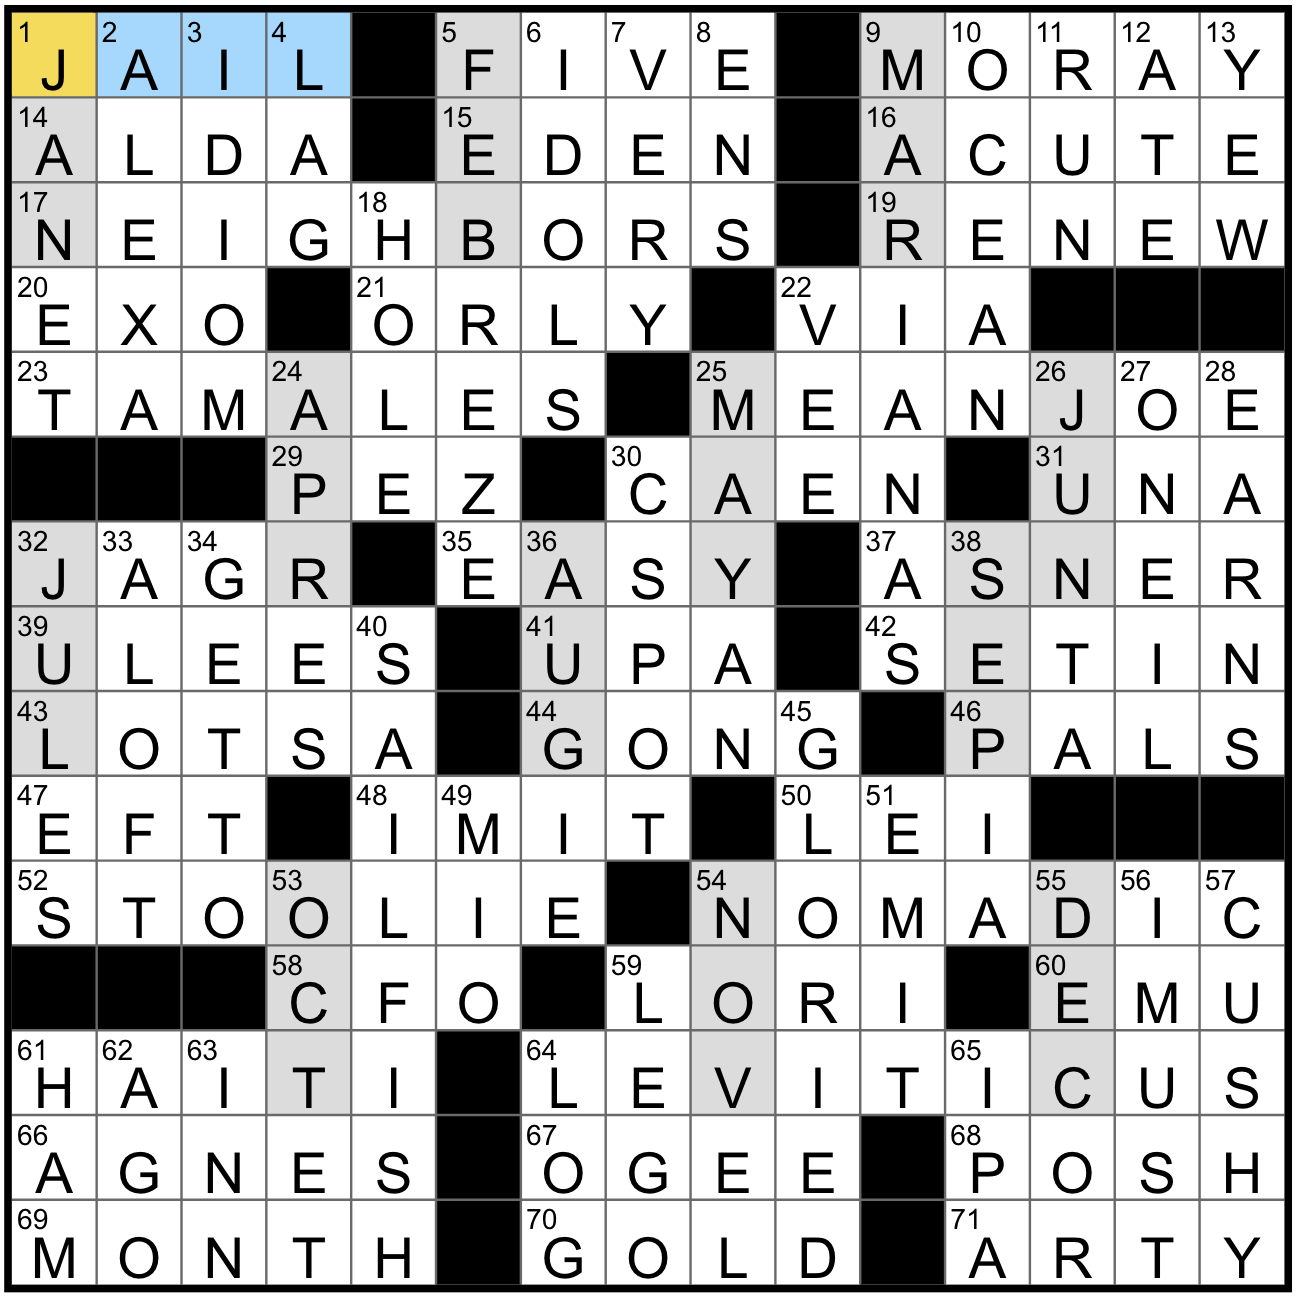 Rex Parker Does the NYT Crossword Puzzle: September 2022